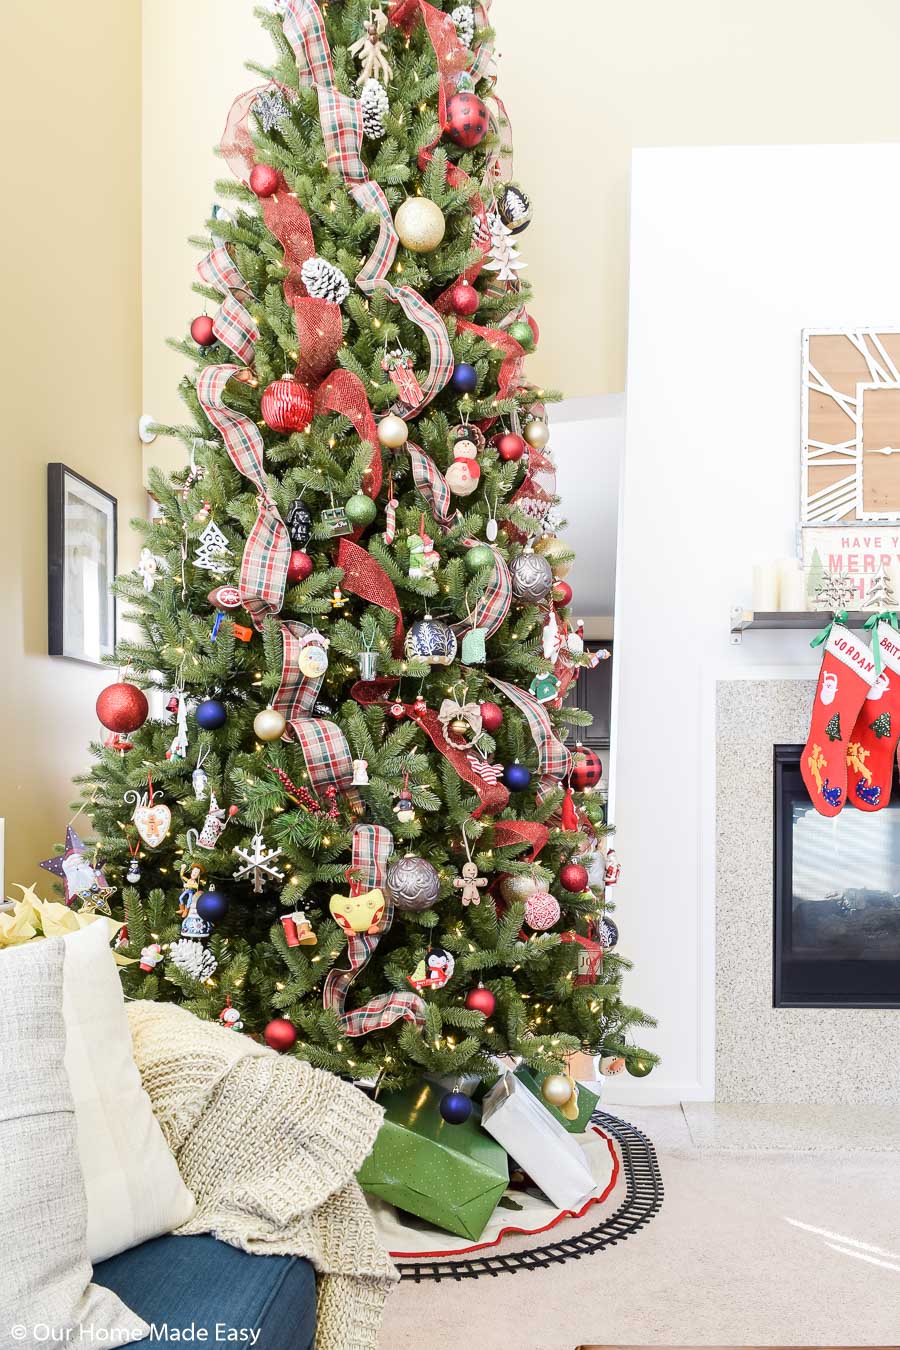 How much it costs to decorate big for Christmas in the US